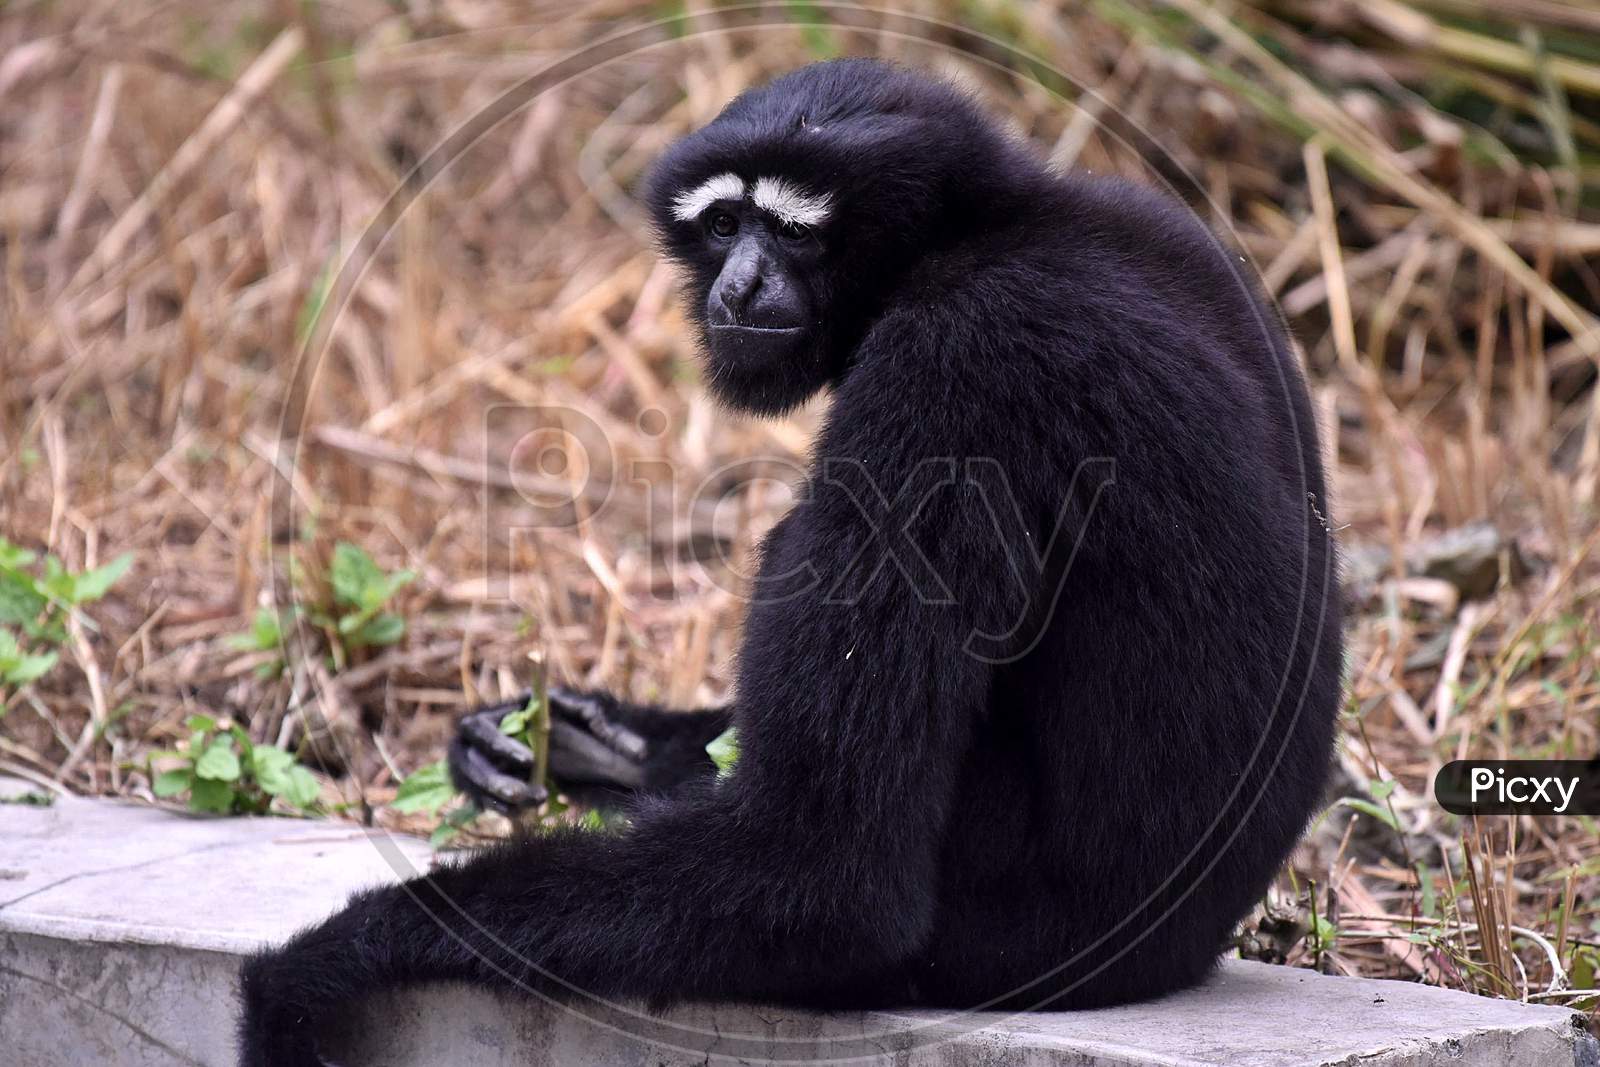 A Hoolock Gibbon pictured inside The Enclosure At The Assam State Zoo Cum Botanical Garden In Guwahati